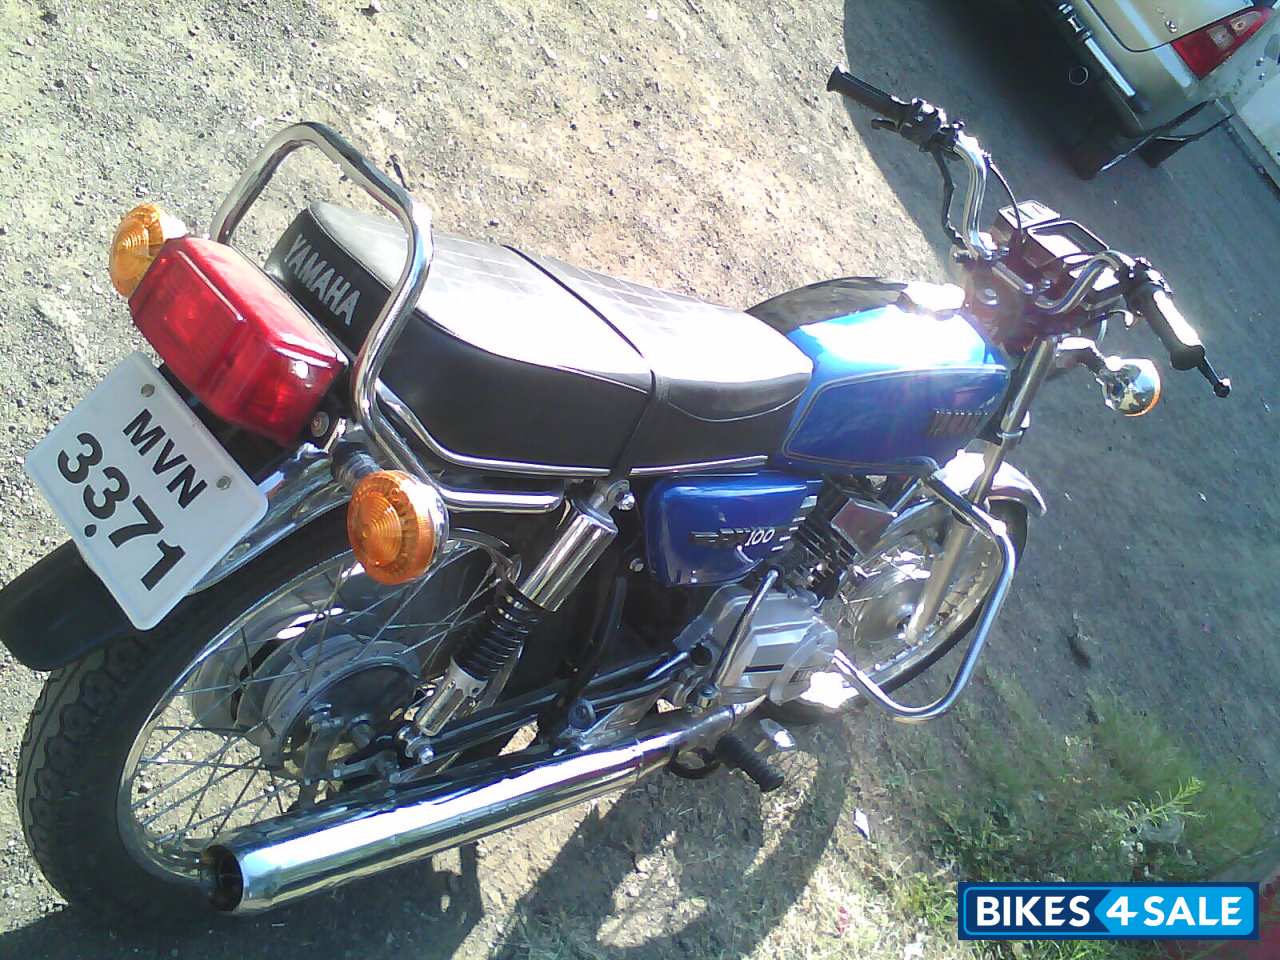 Used 1987 Model Yamaha Rx 100 For Sale In Pune Id Dual Colour Bikes4sale